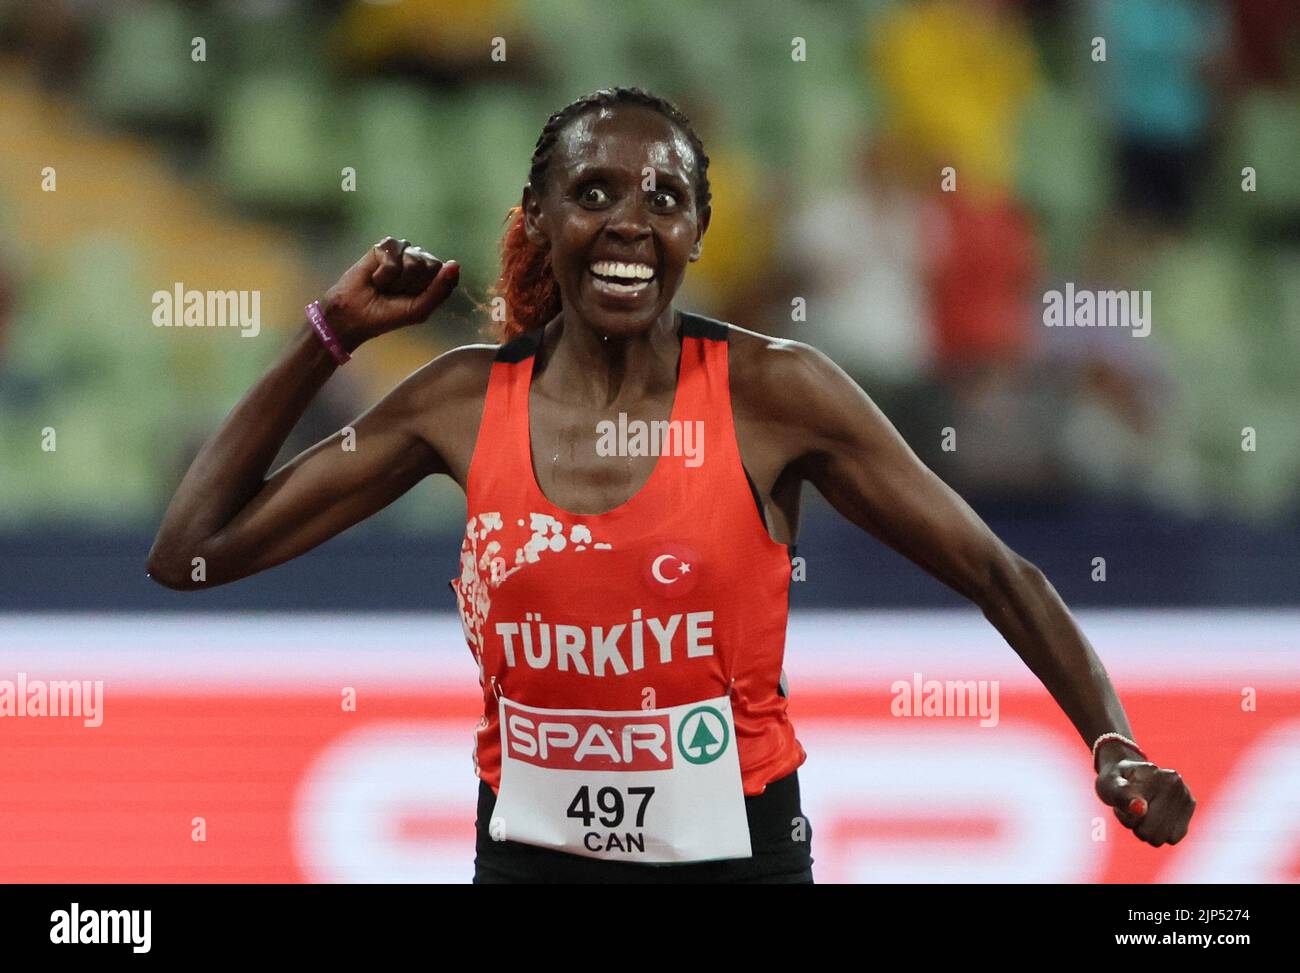 Athletics - 2022 European Championships - Olympiastadion, Munich, Germany - August 15, 2022  Turkey's Yasemin Can celebrates as she crosses the line to win the women's 10,000m final REUTERS/Wolfgang Rattay Stock Photo